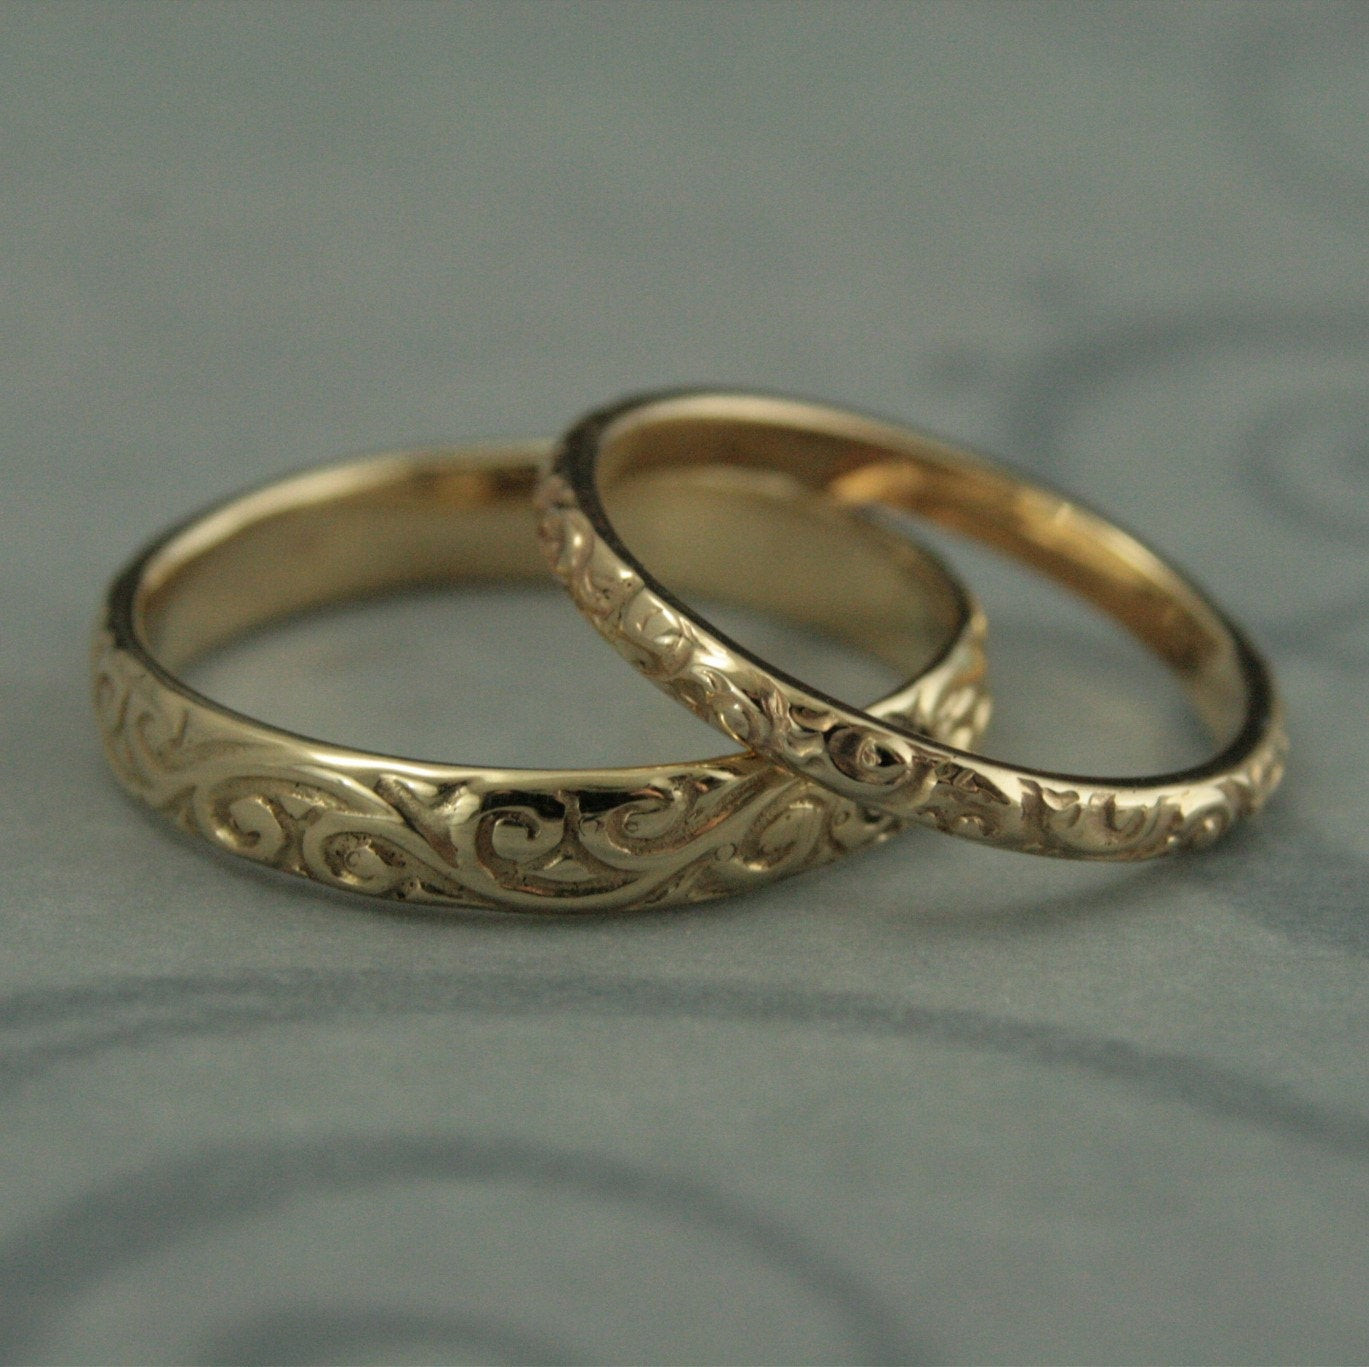 Wedding Rings Vintage
 Patterned Wedding Band Set Vintage Style Wedding Rings His and